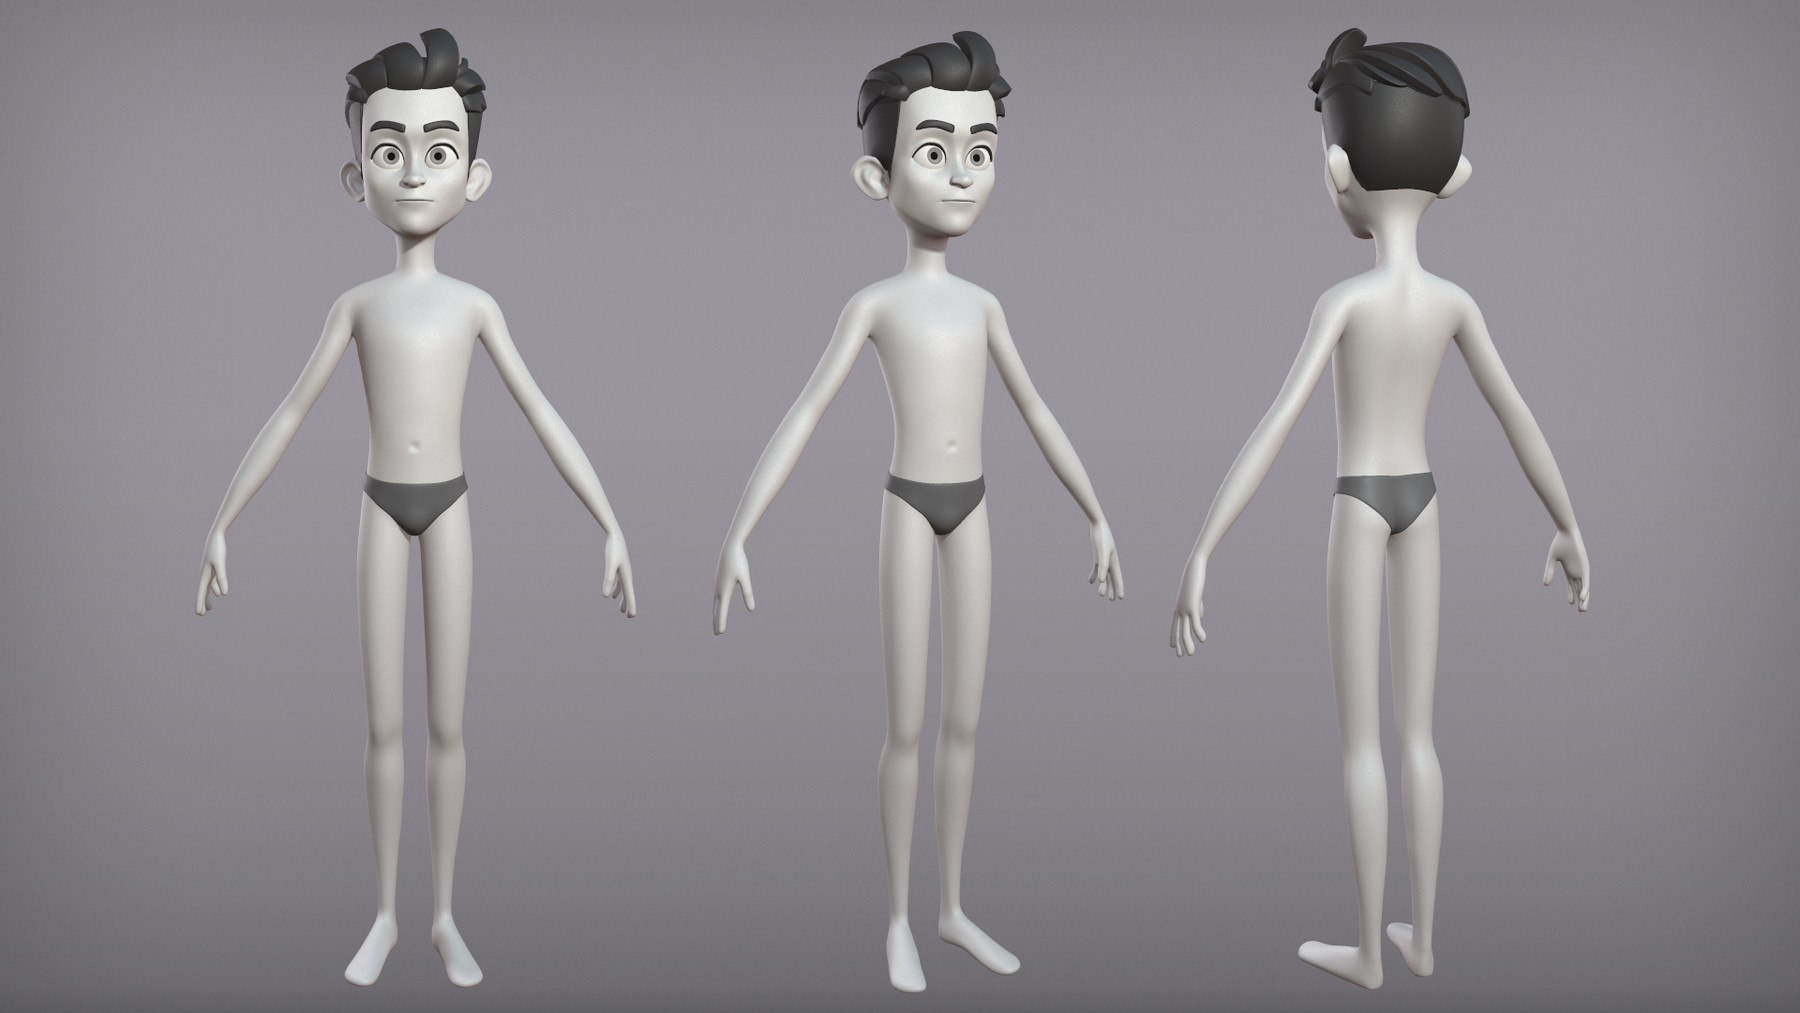 ArtStation - Male and female cartoon characters base mesh | Resources